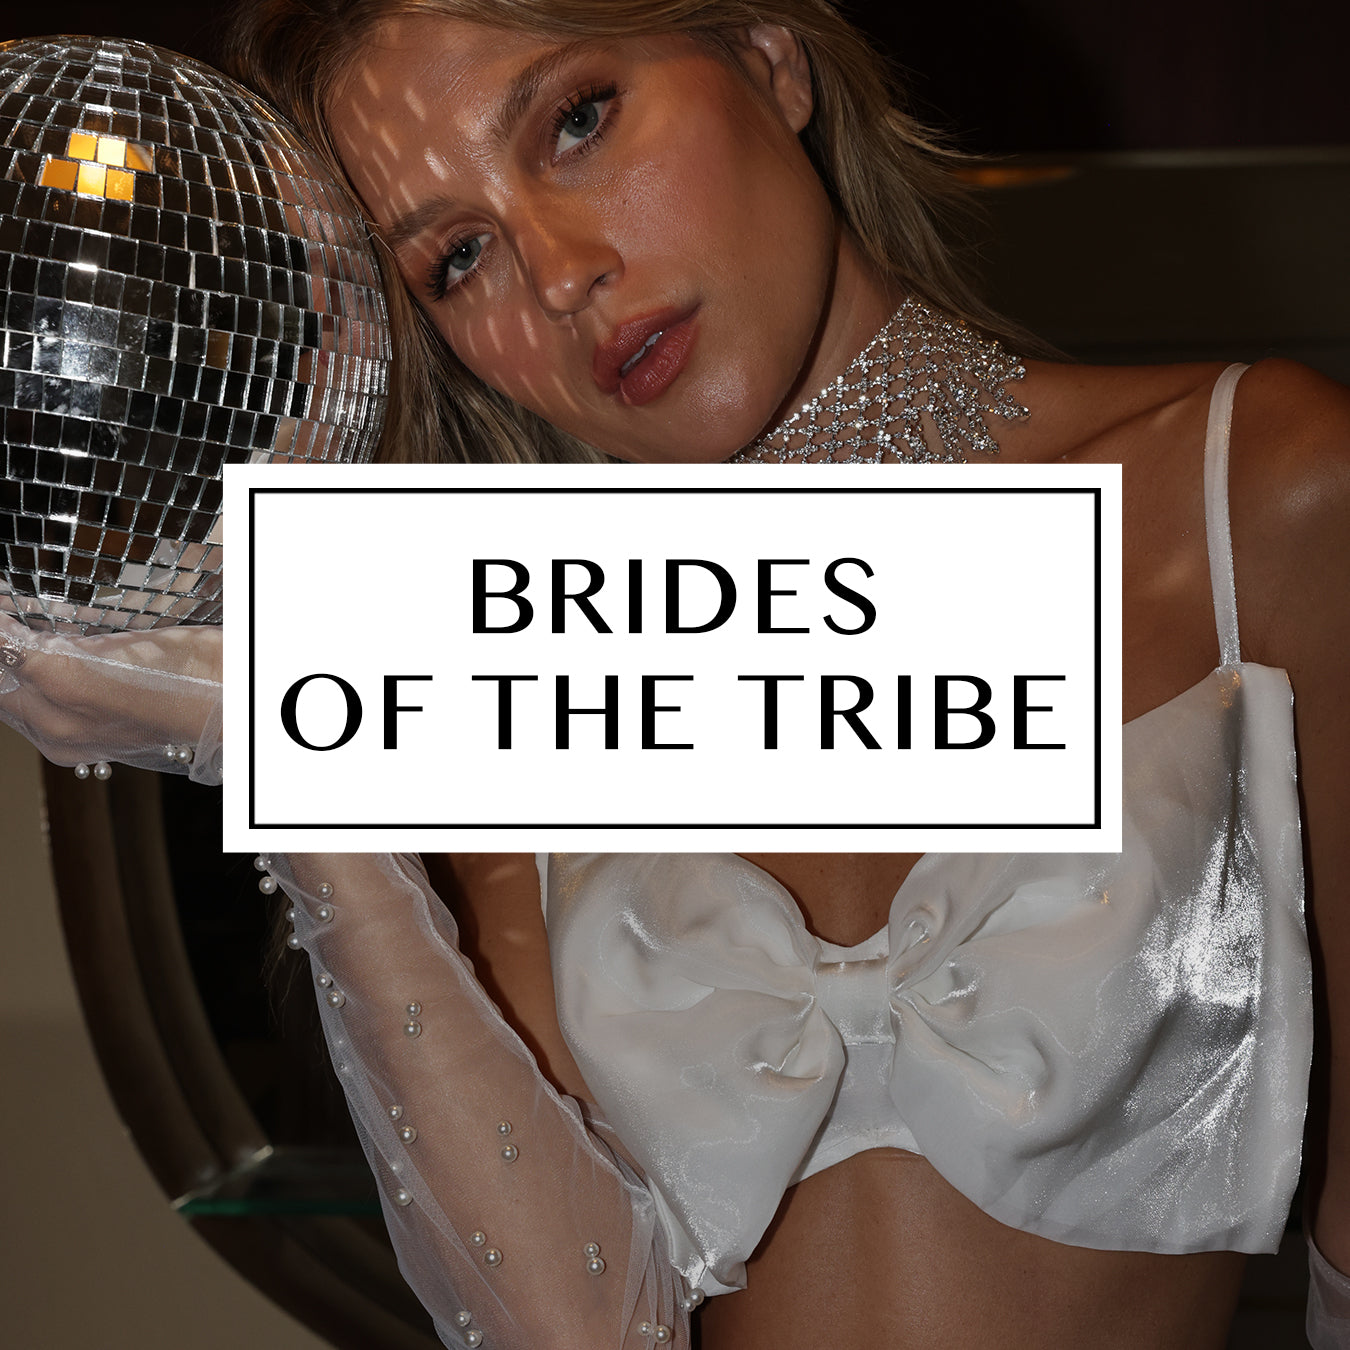 BRIDES OF THE TRIBE